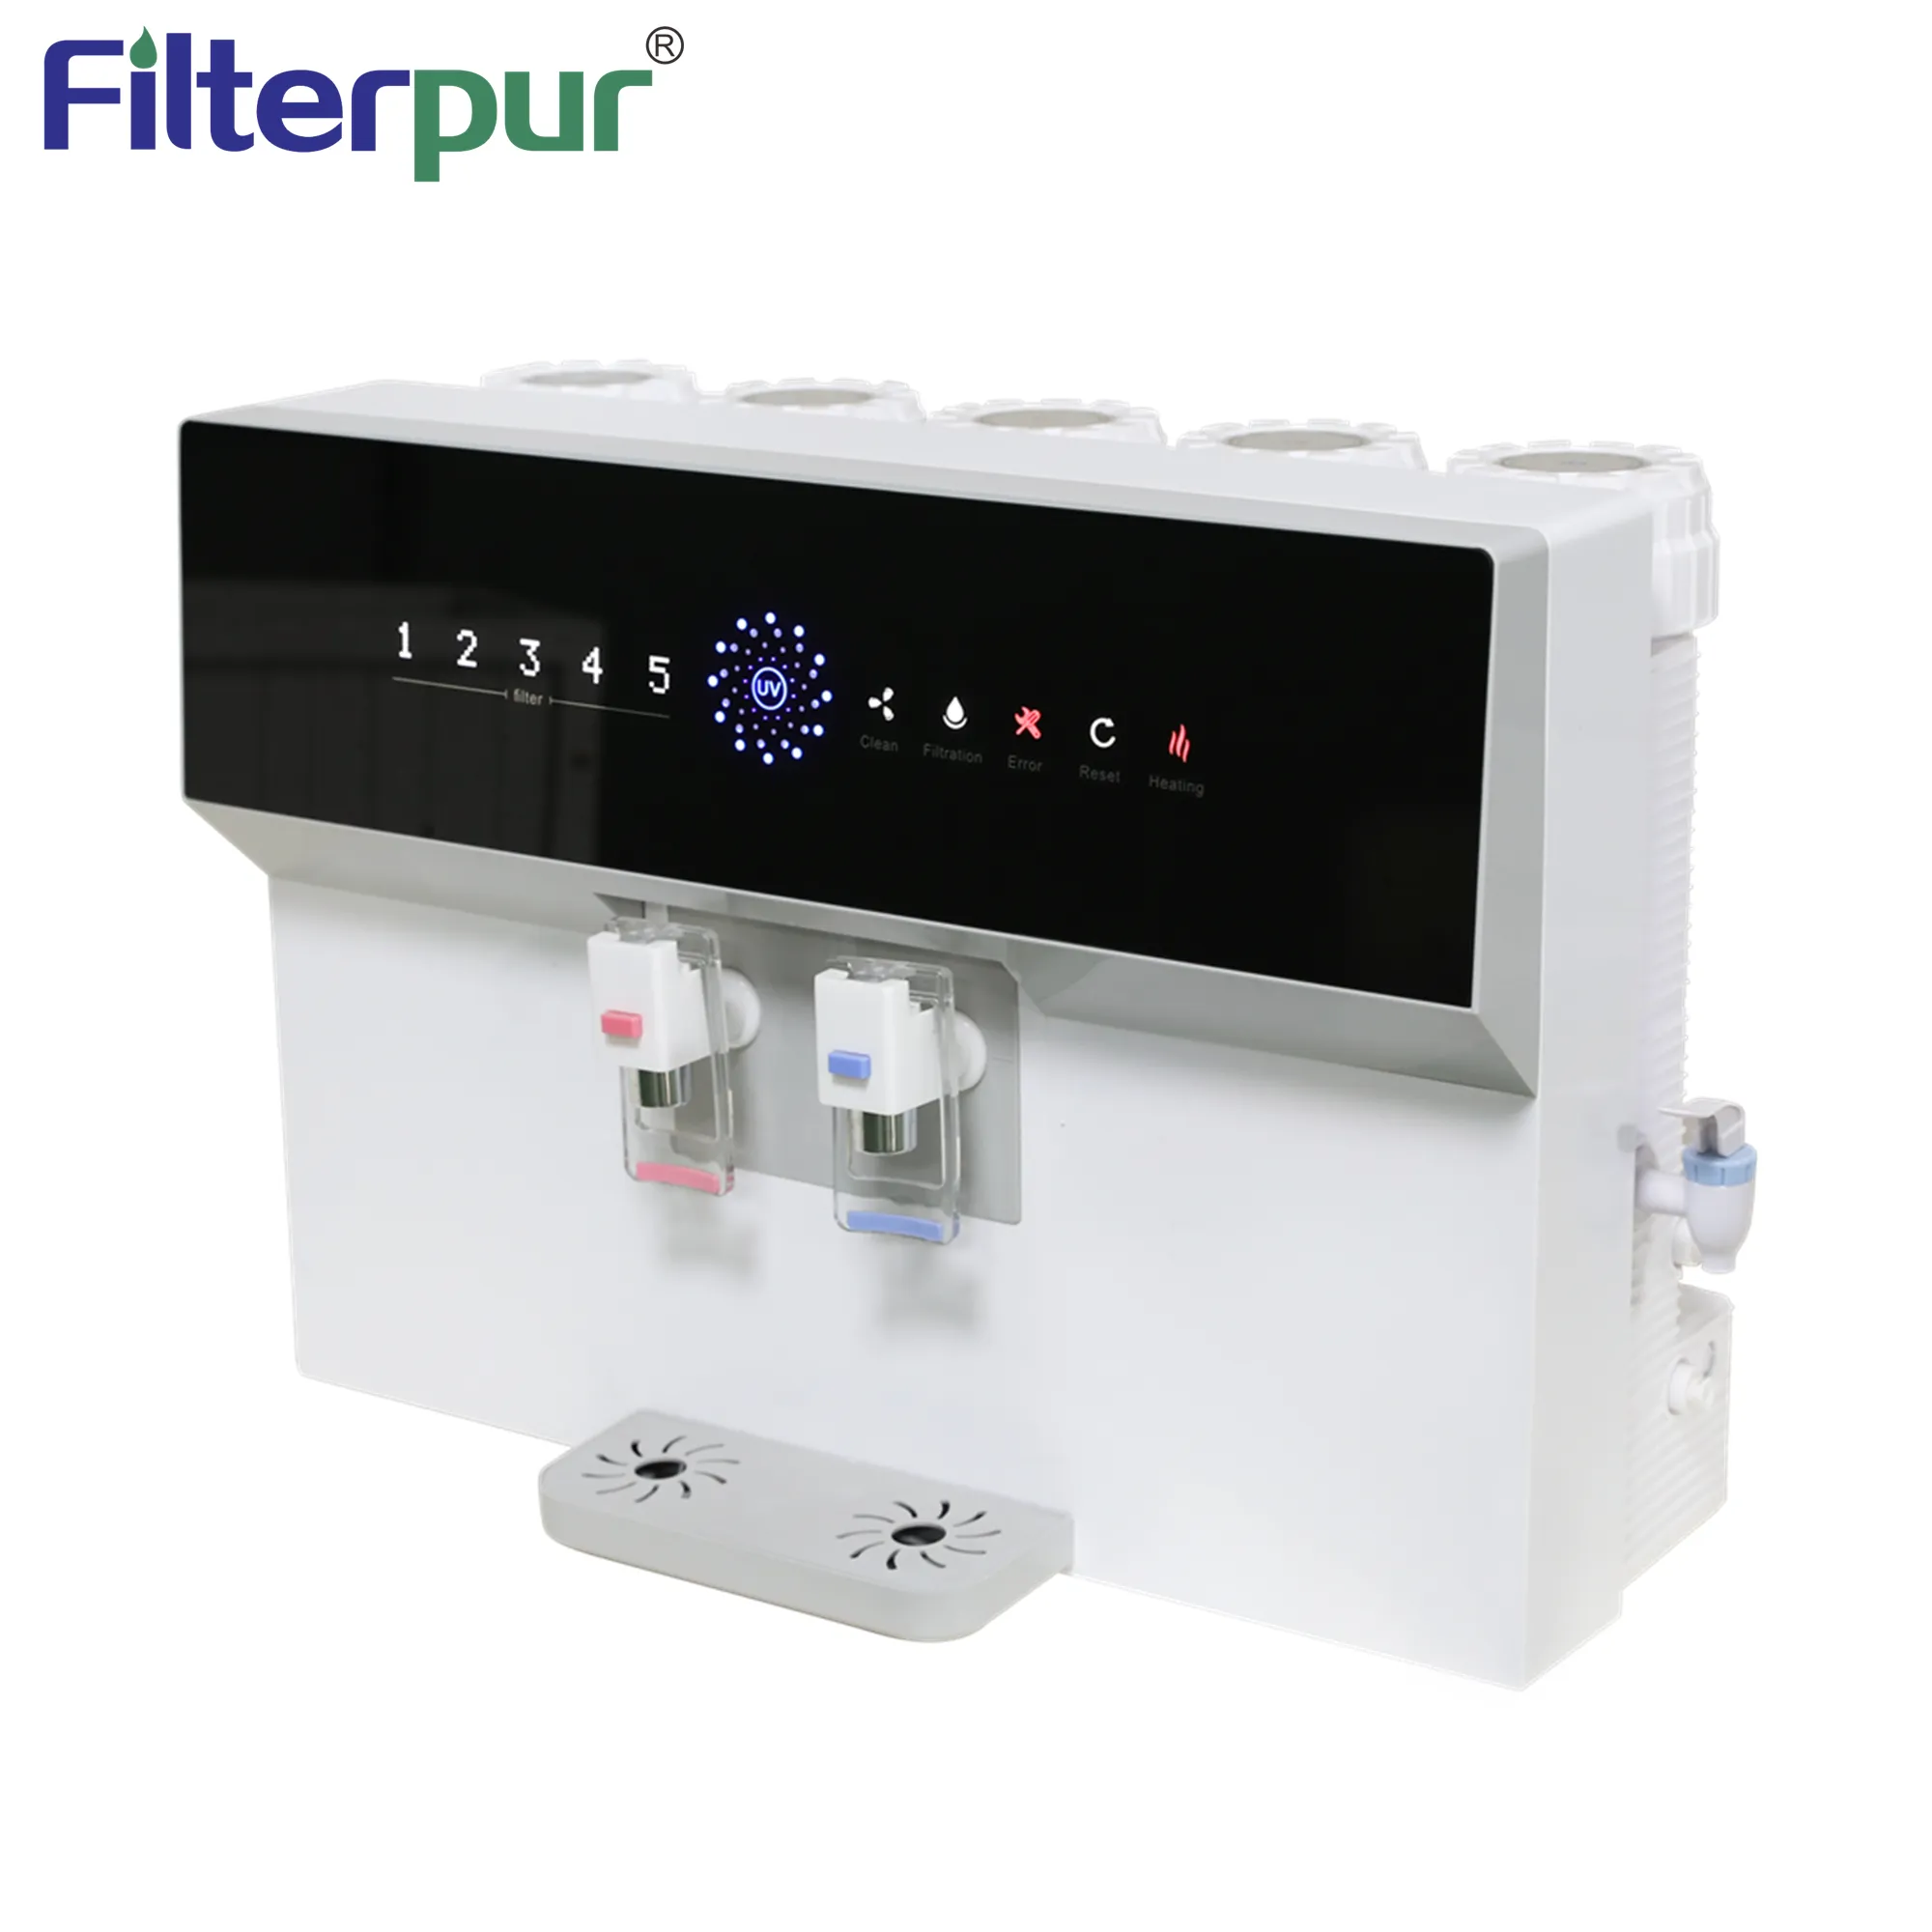 Wall Mounted Hot Warm Water 5 Stage Instant Water Dispenser Quality Water Purifier